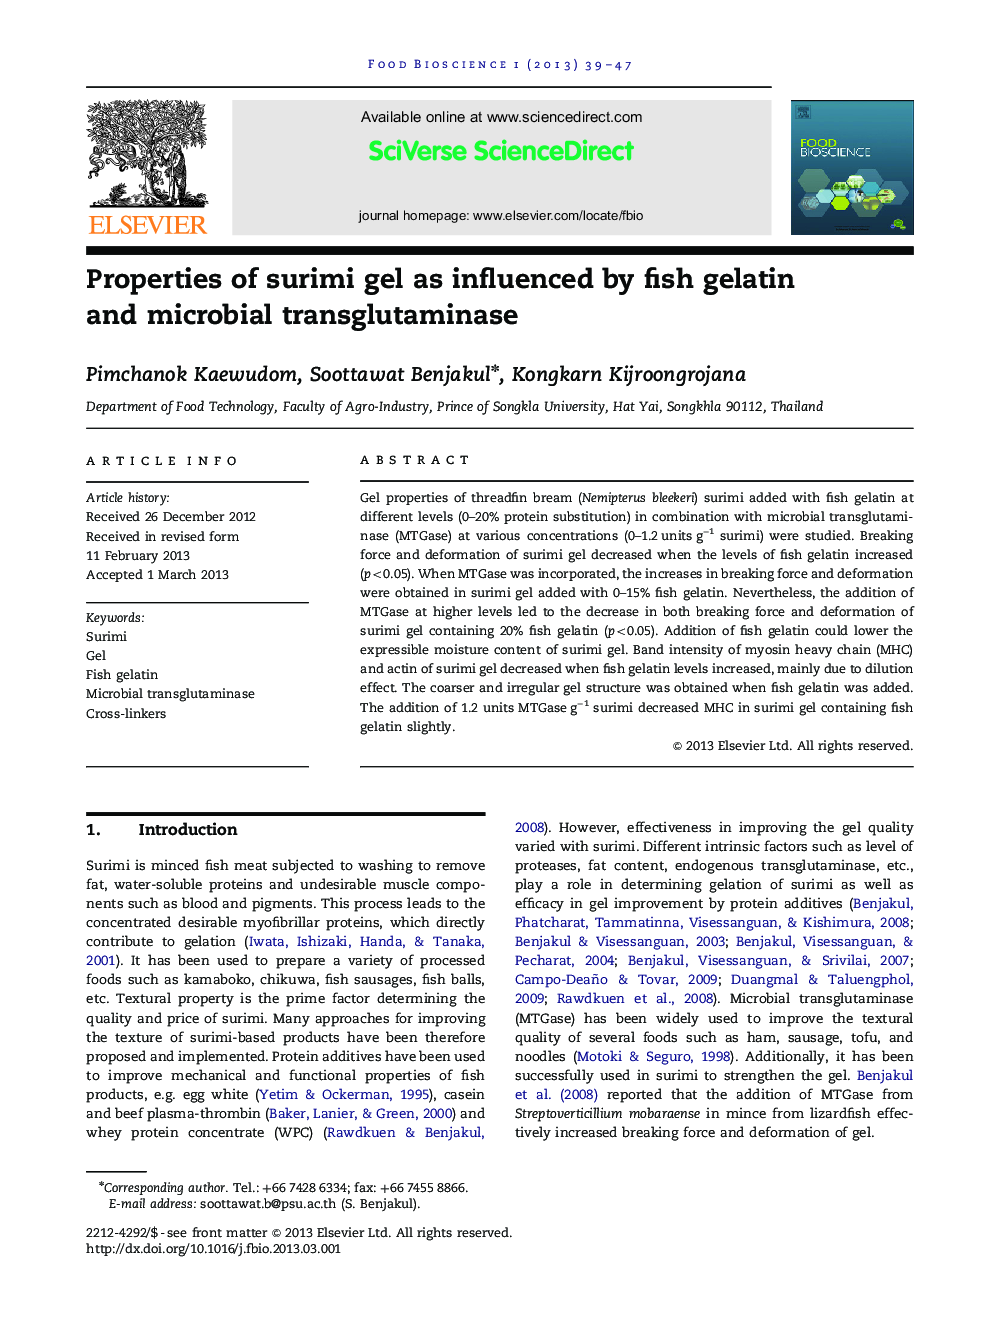 Properties of surimi gel as influenced by fish gelatin and microbial transglutaminase